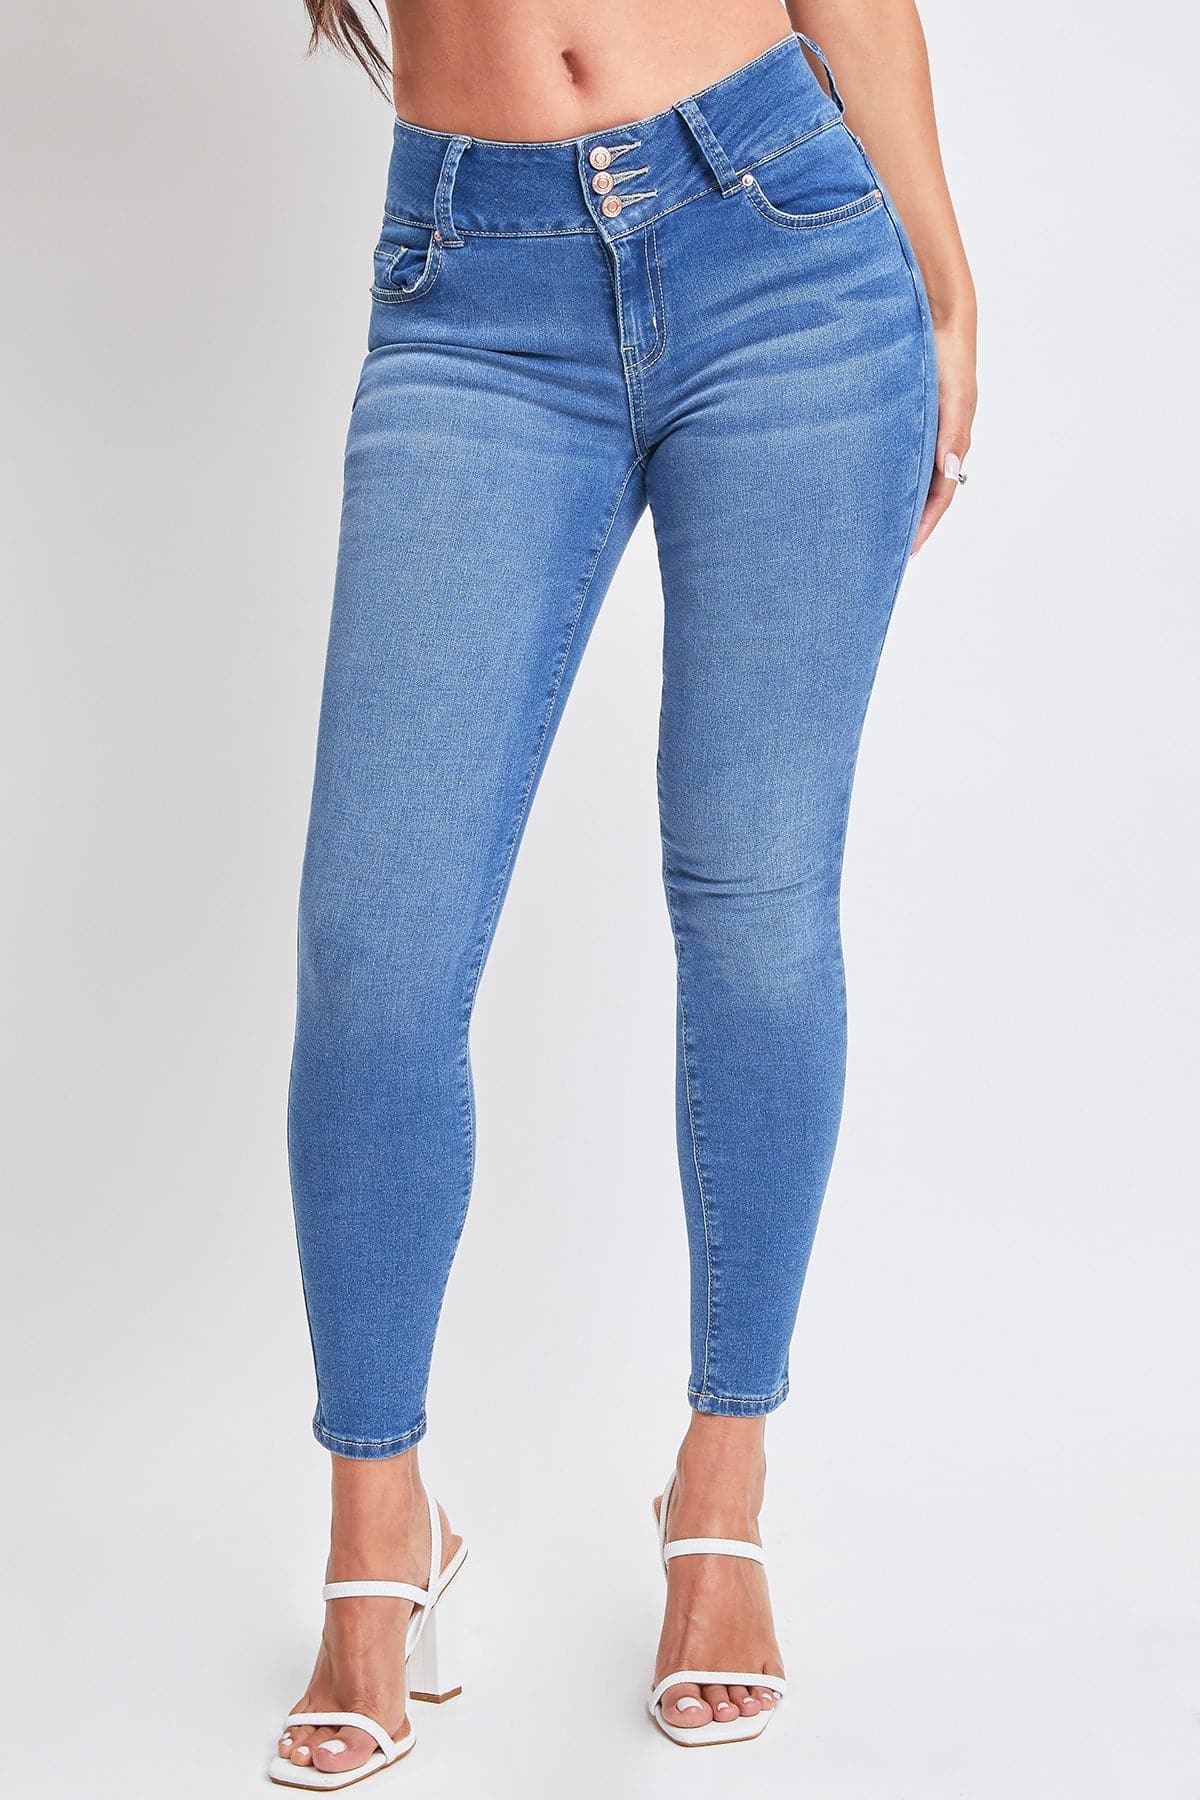 Women's Essential 3 Button Skinny Jeans